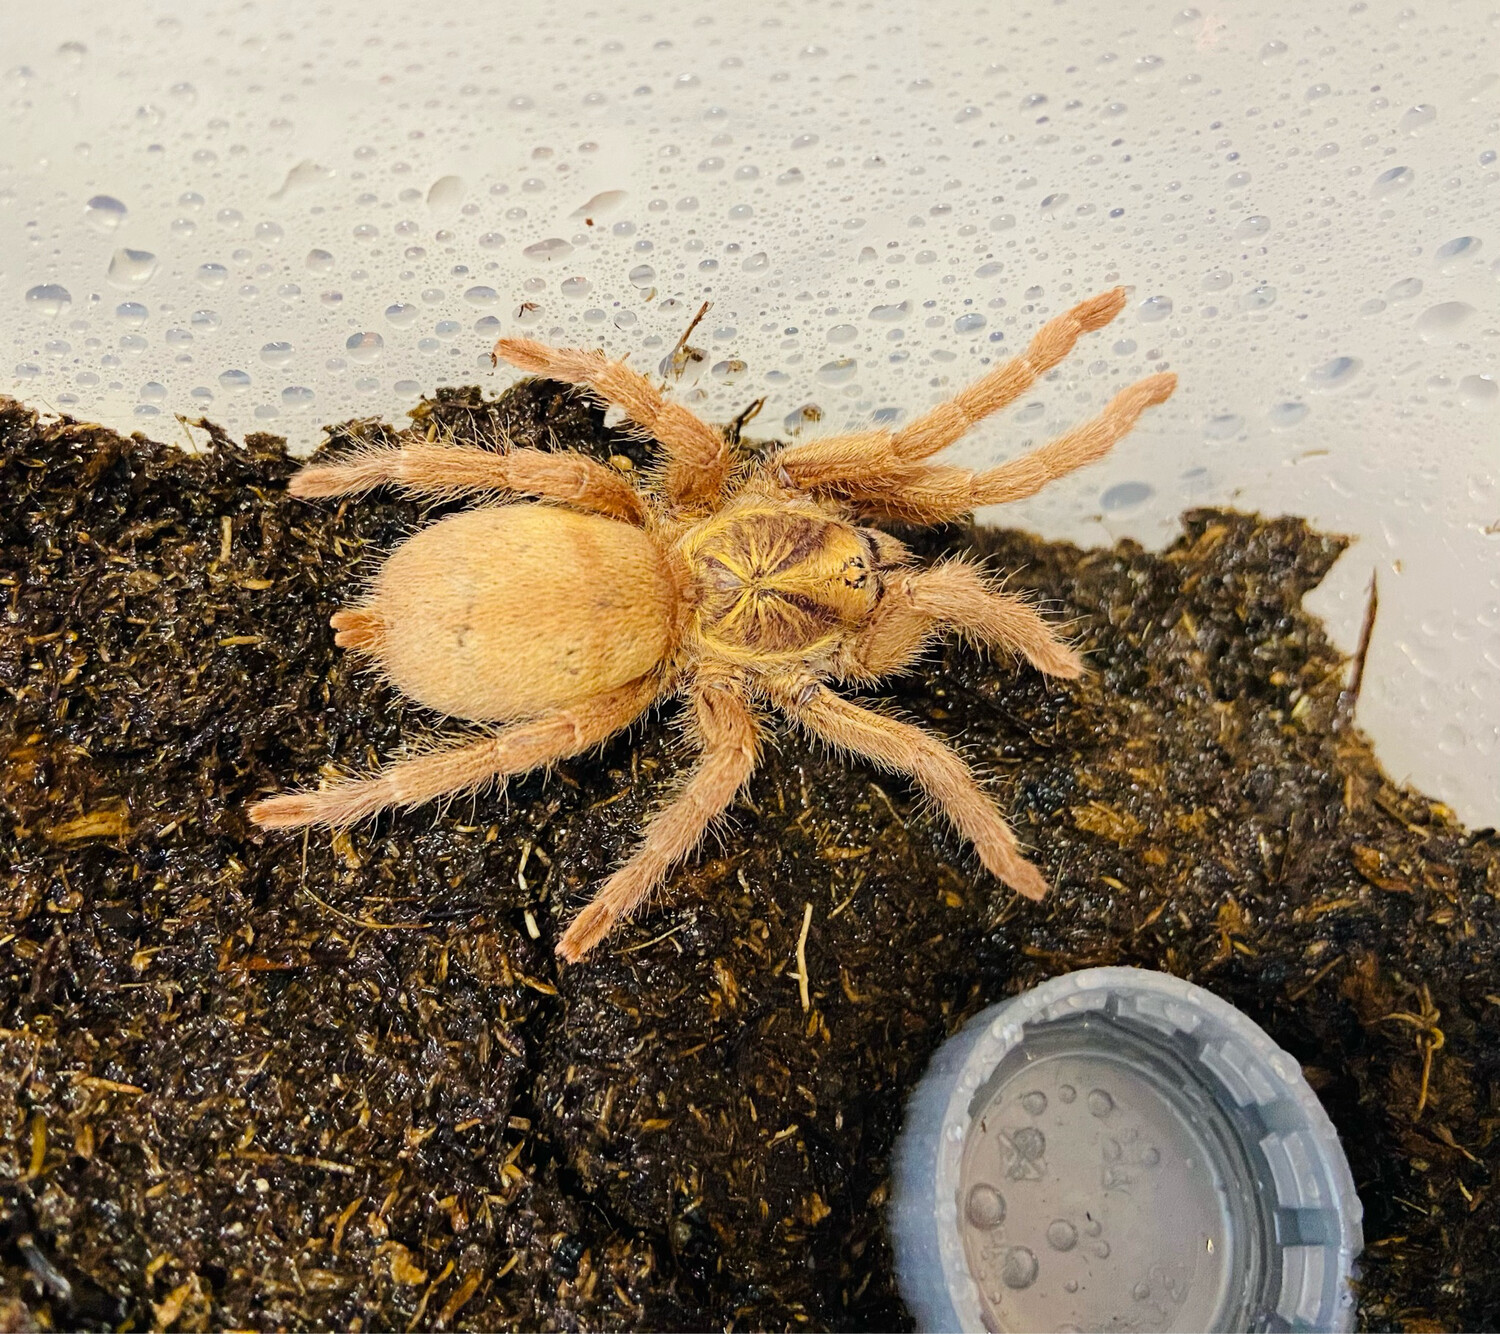 Neoholthele incei gold (3cm KL)